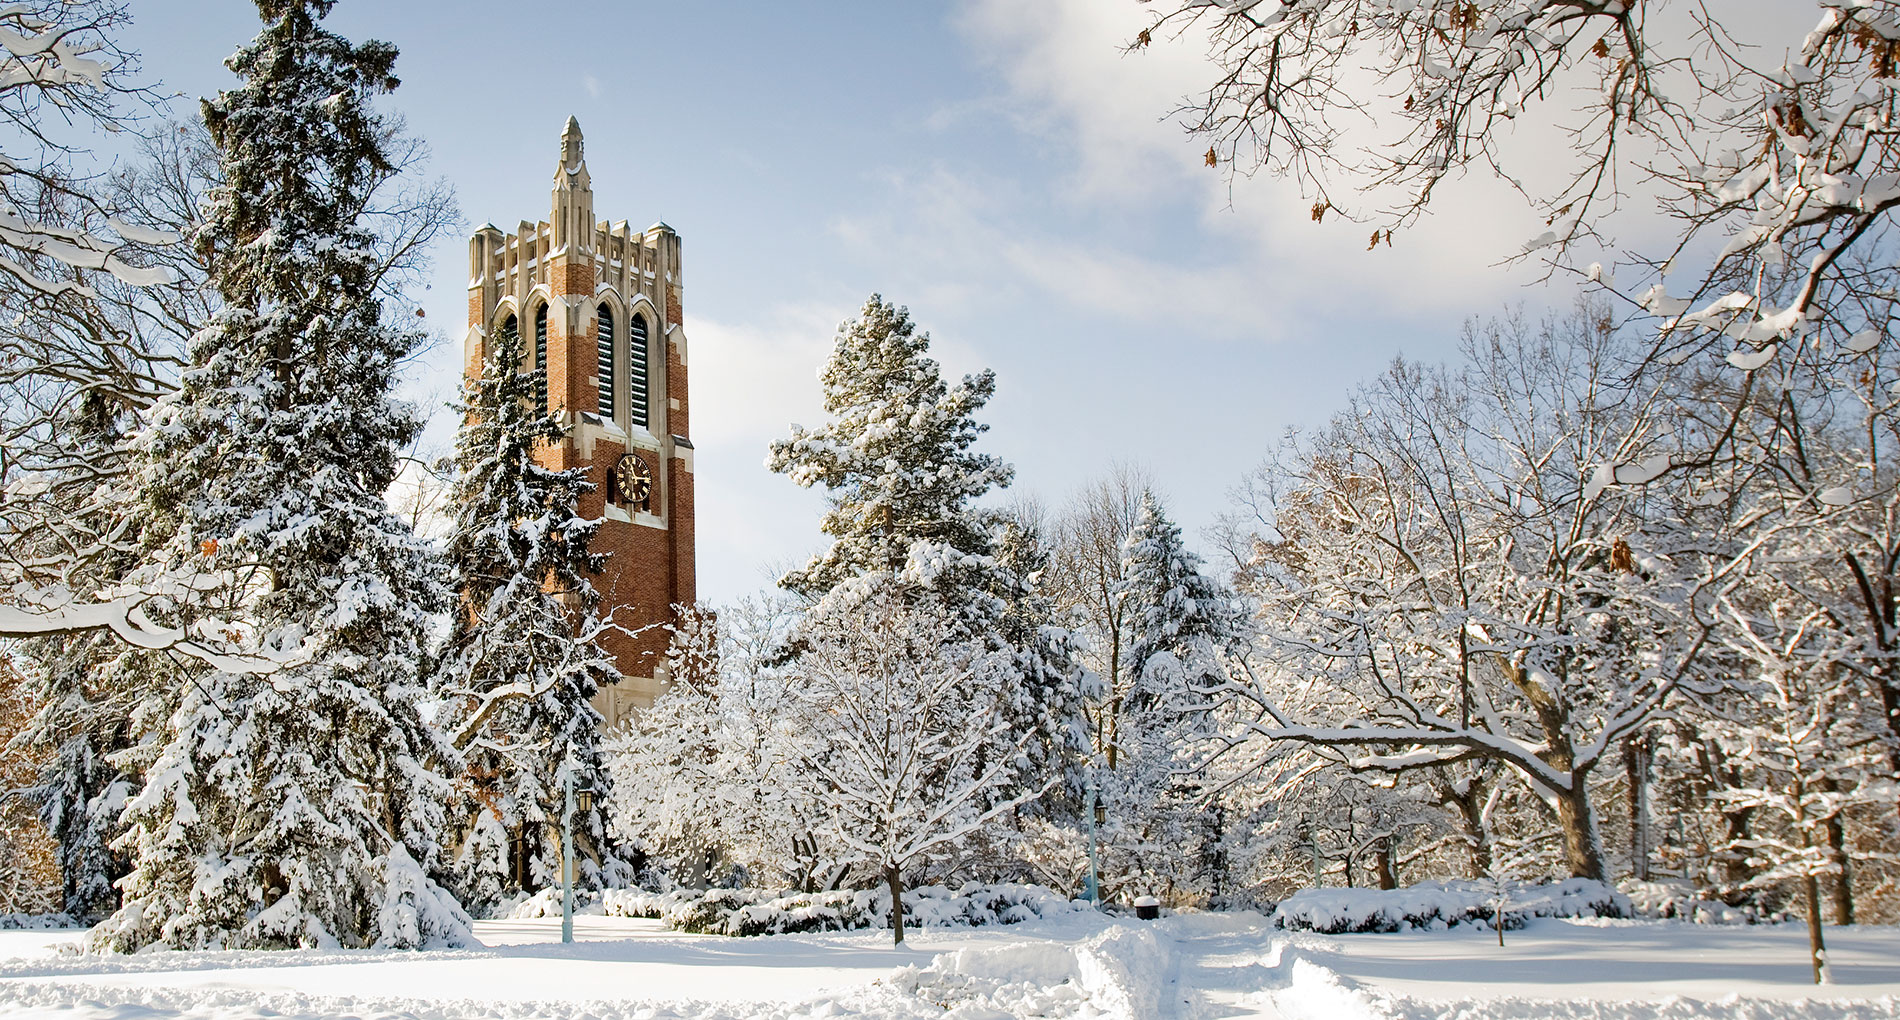 picture of the beaumont tower, made of red bricks, trees are surrounding the building with snow all around